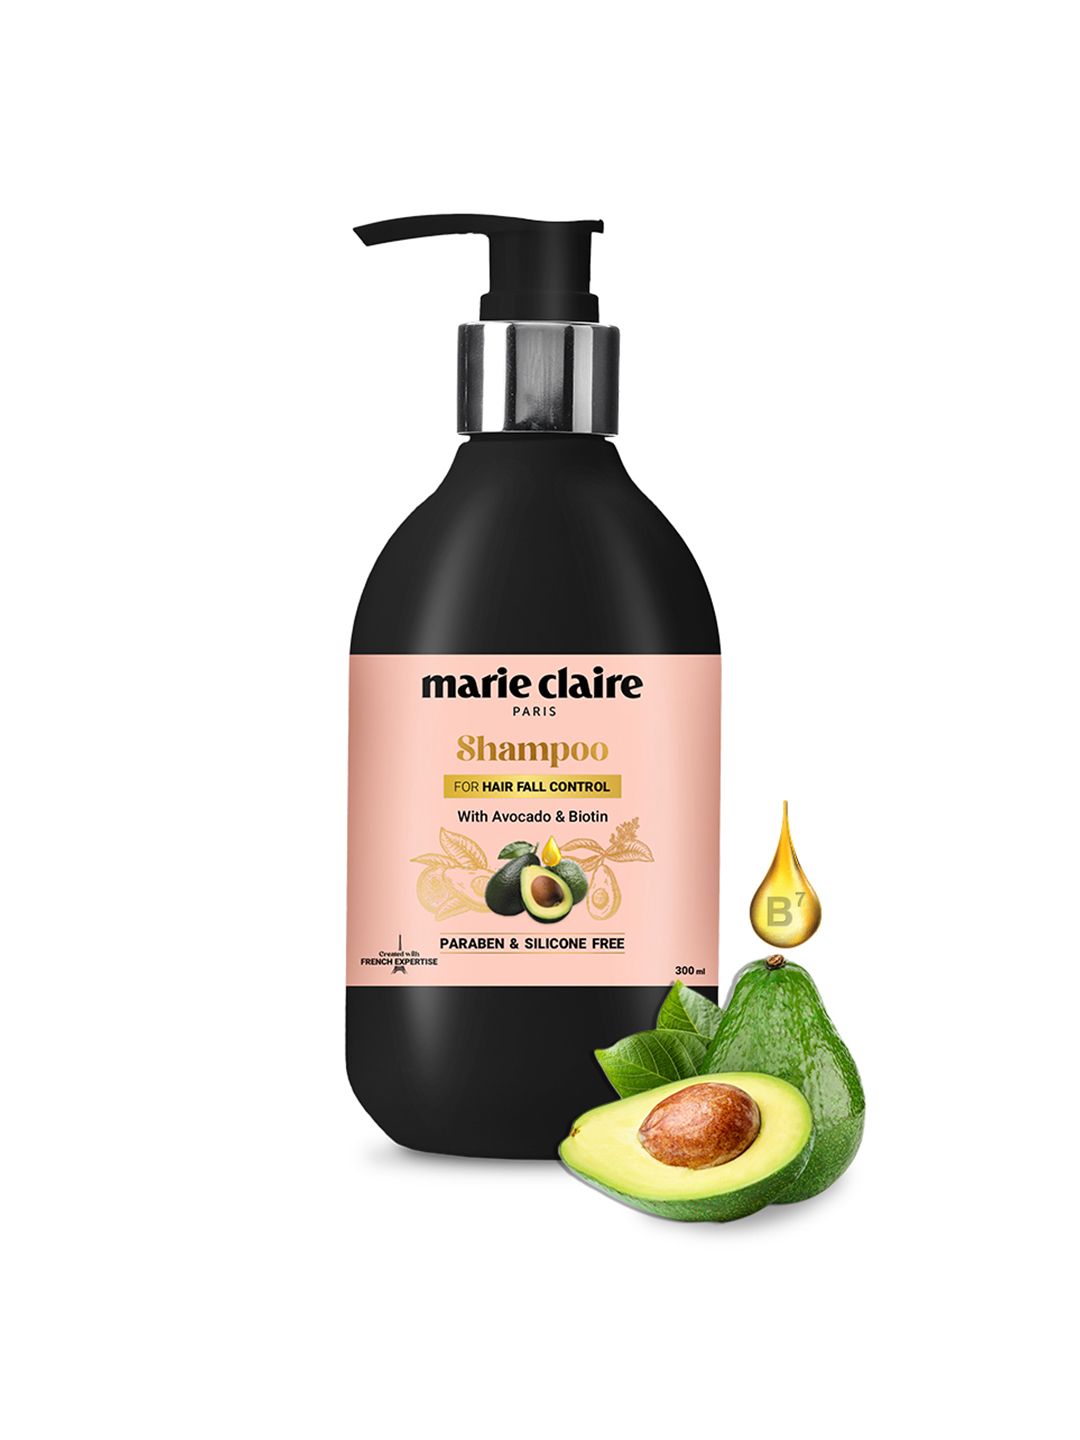 Marie Claire Shampoo For Hair Fall Control 300 ml Price in India